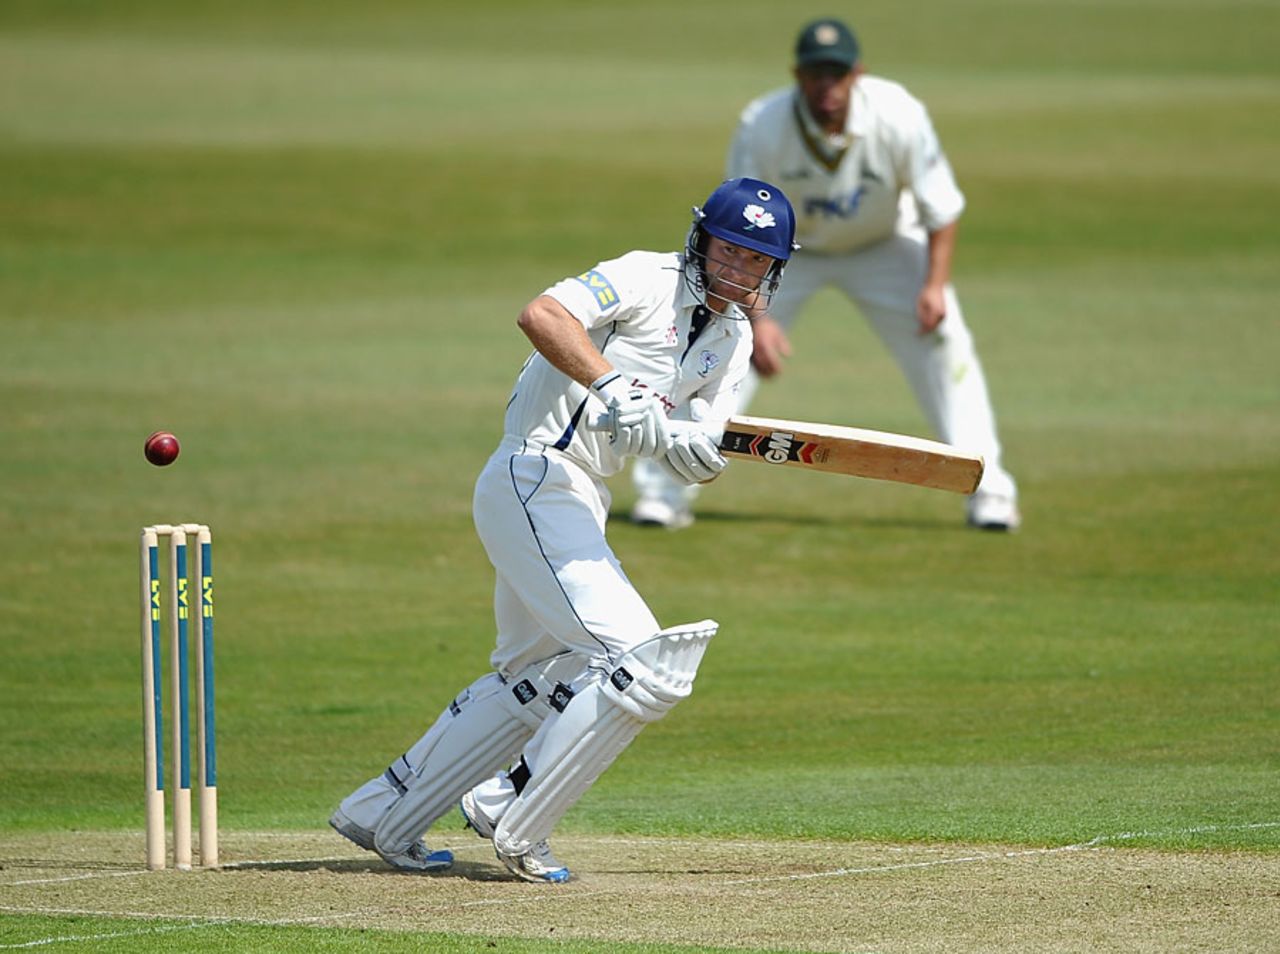 Adam Lyth works into the leg side, Nottinghamshire v Yorkshire, County Championship, Division One, Trent Bridge, May 4, 2011